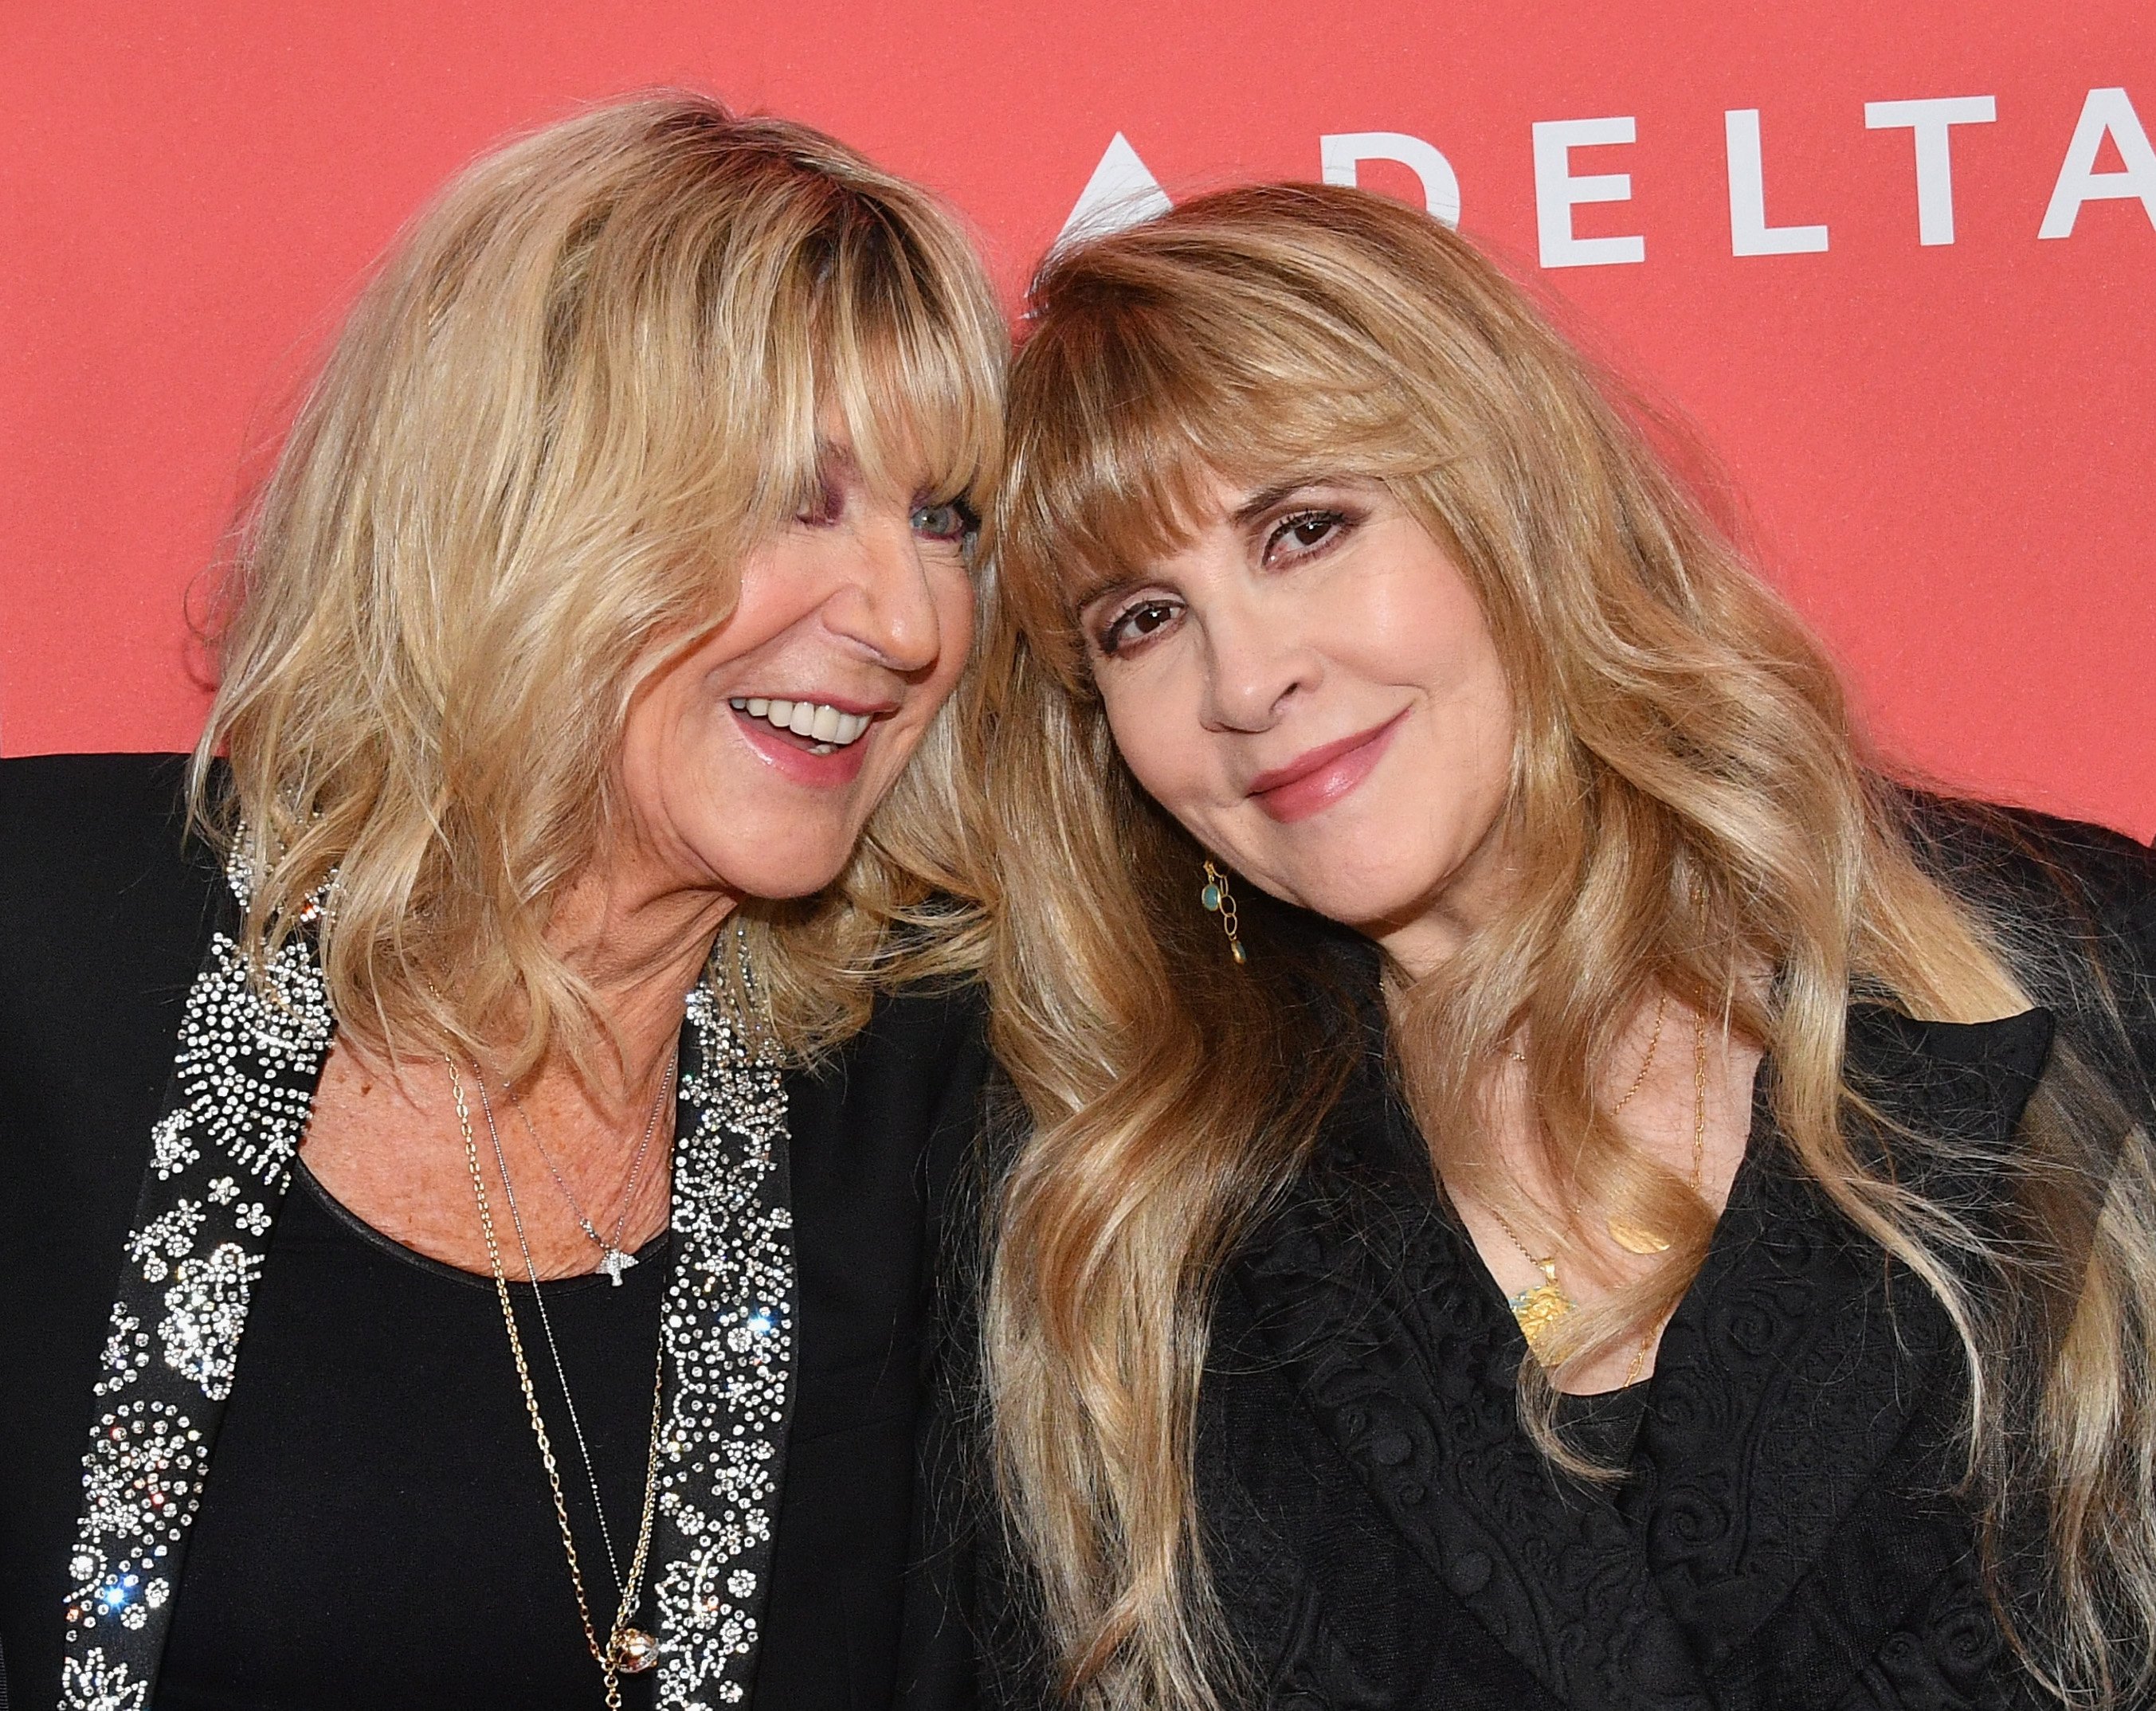 Stevie Nicks and Christine McVie wear black and pose together in front of a red background.